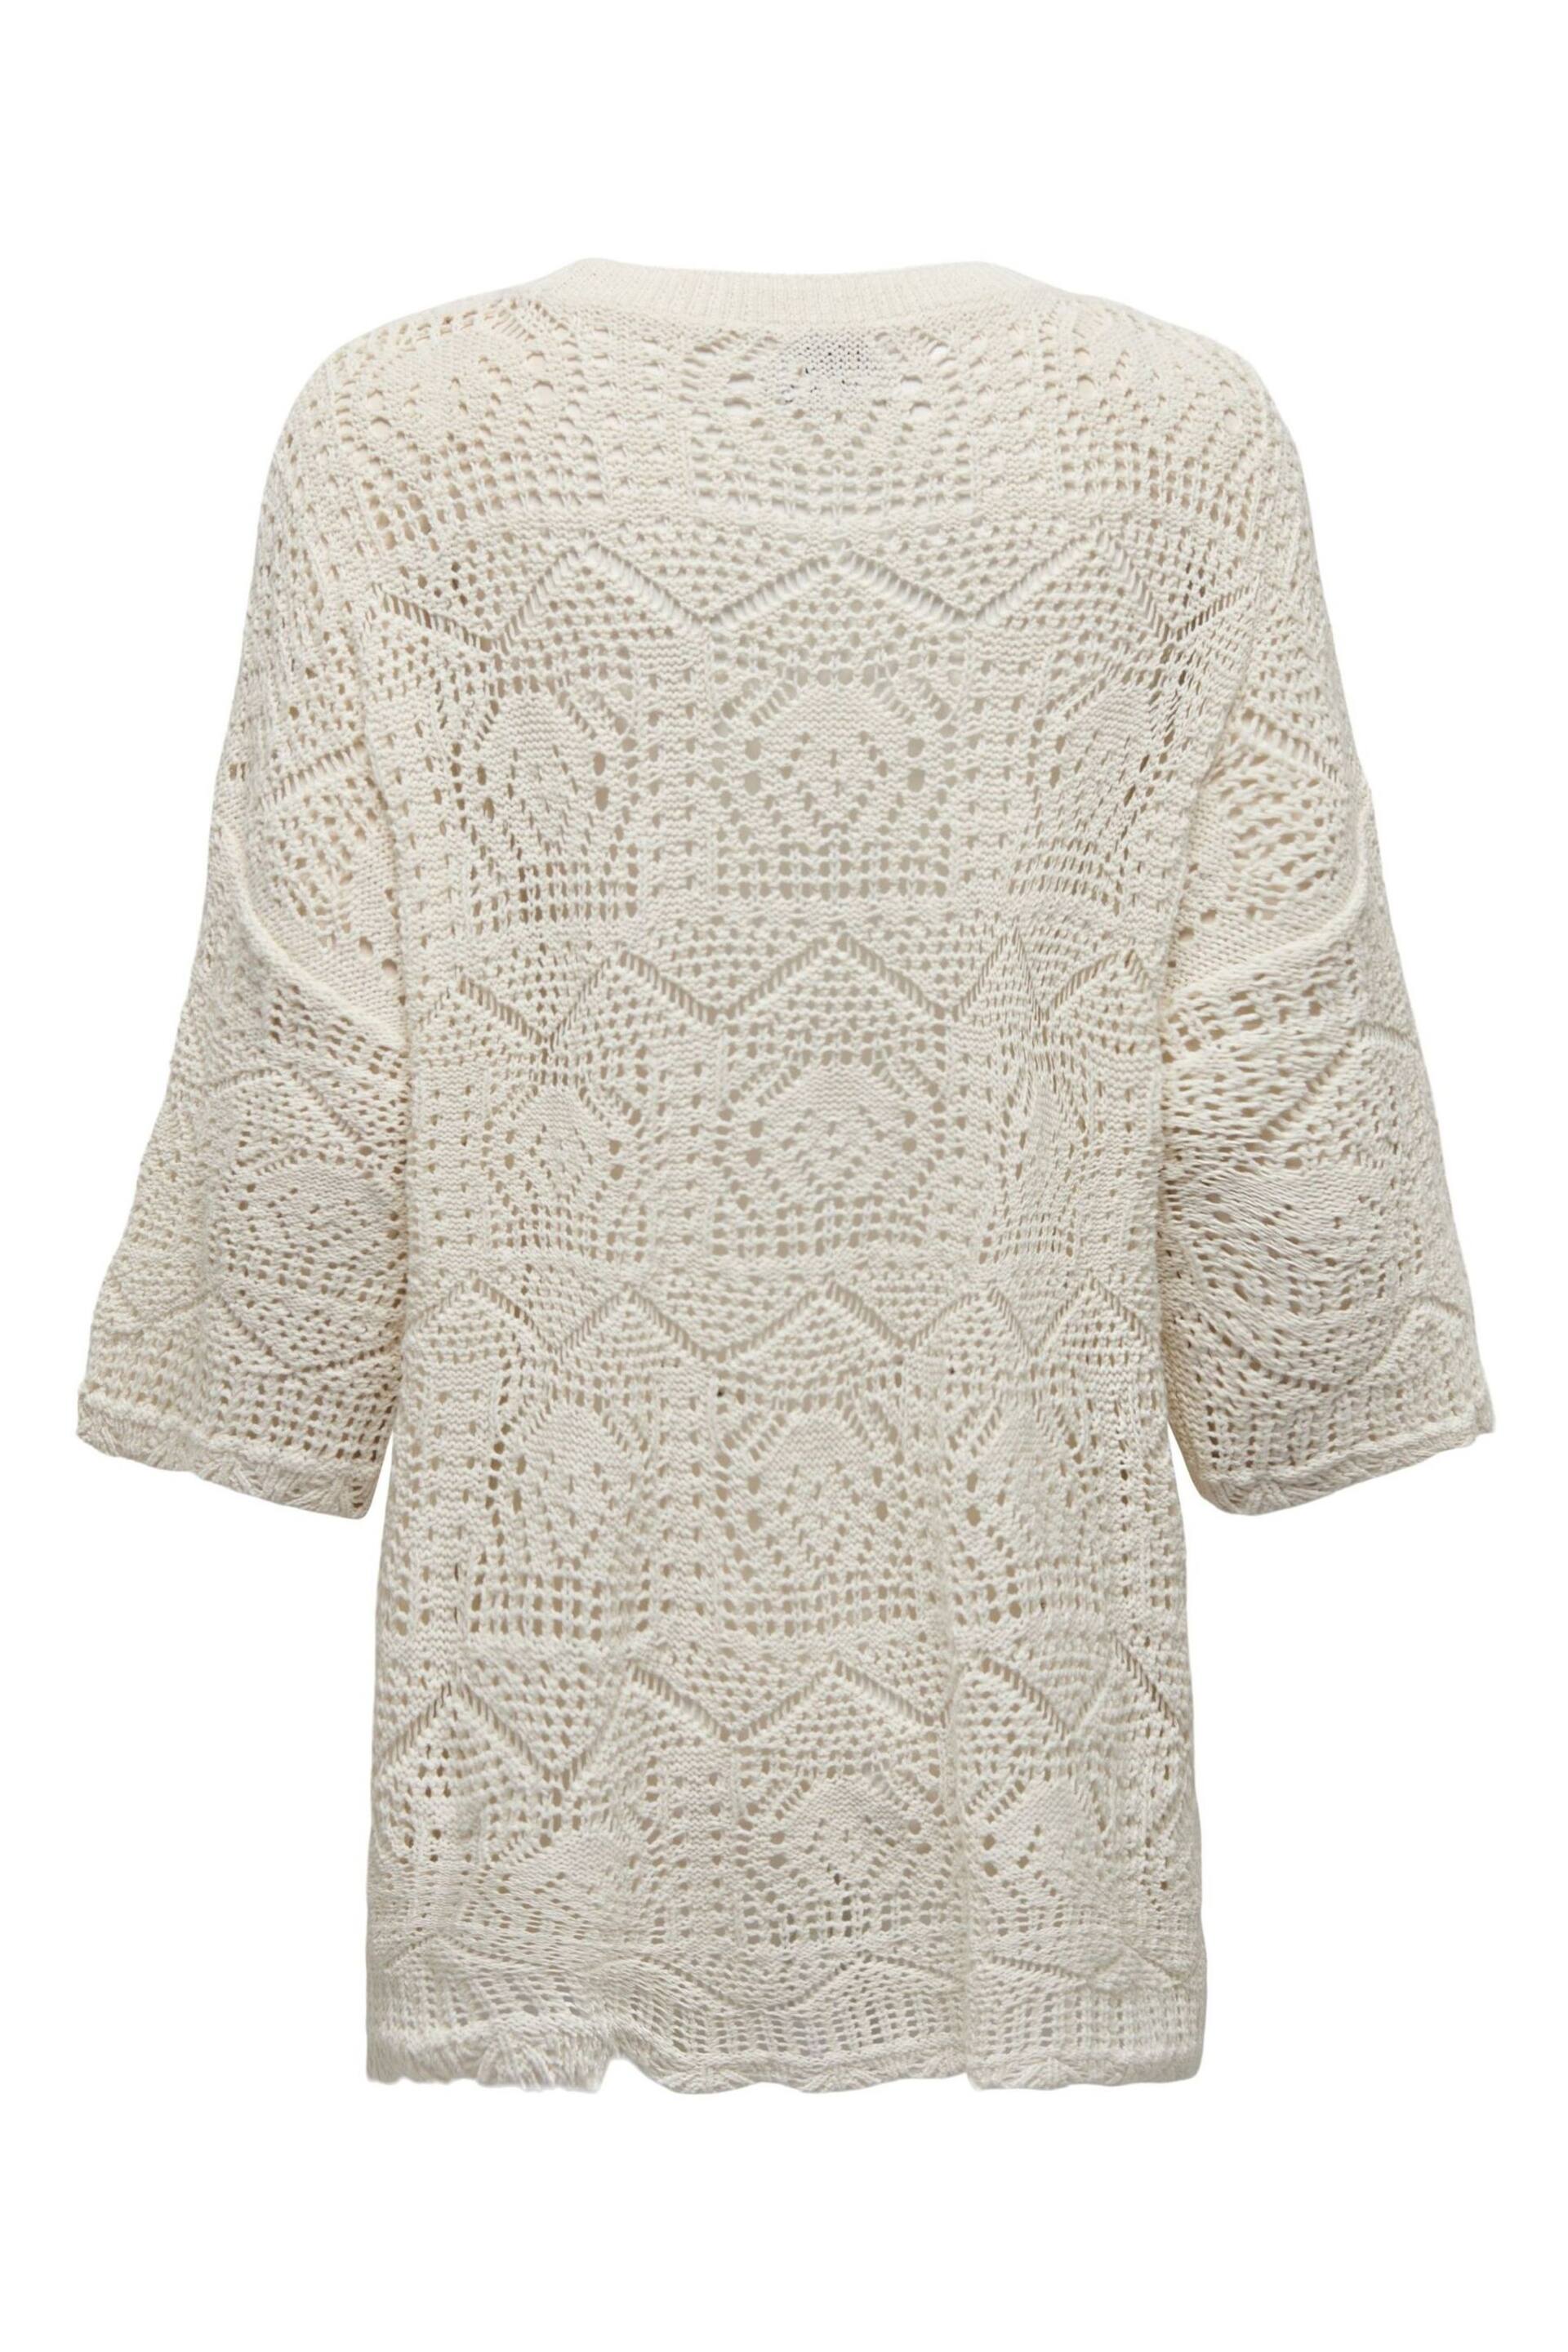 ONLY White Relaxed Fit Crochet Beach Dress - Image 6 of 8